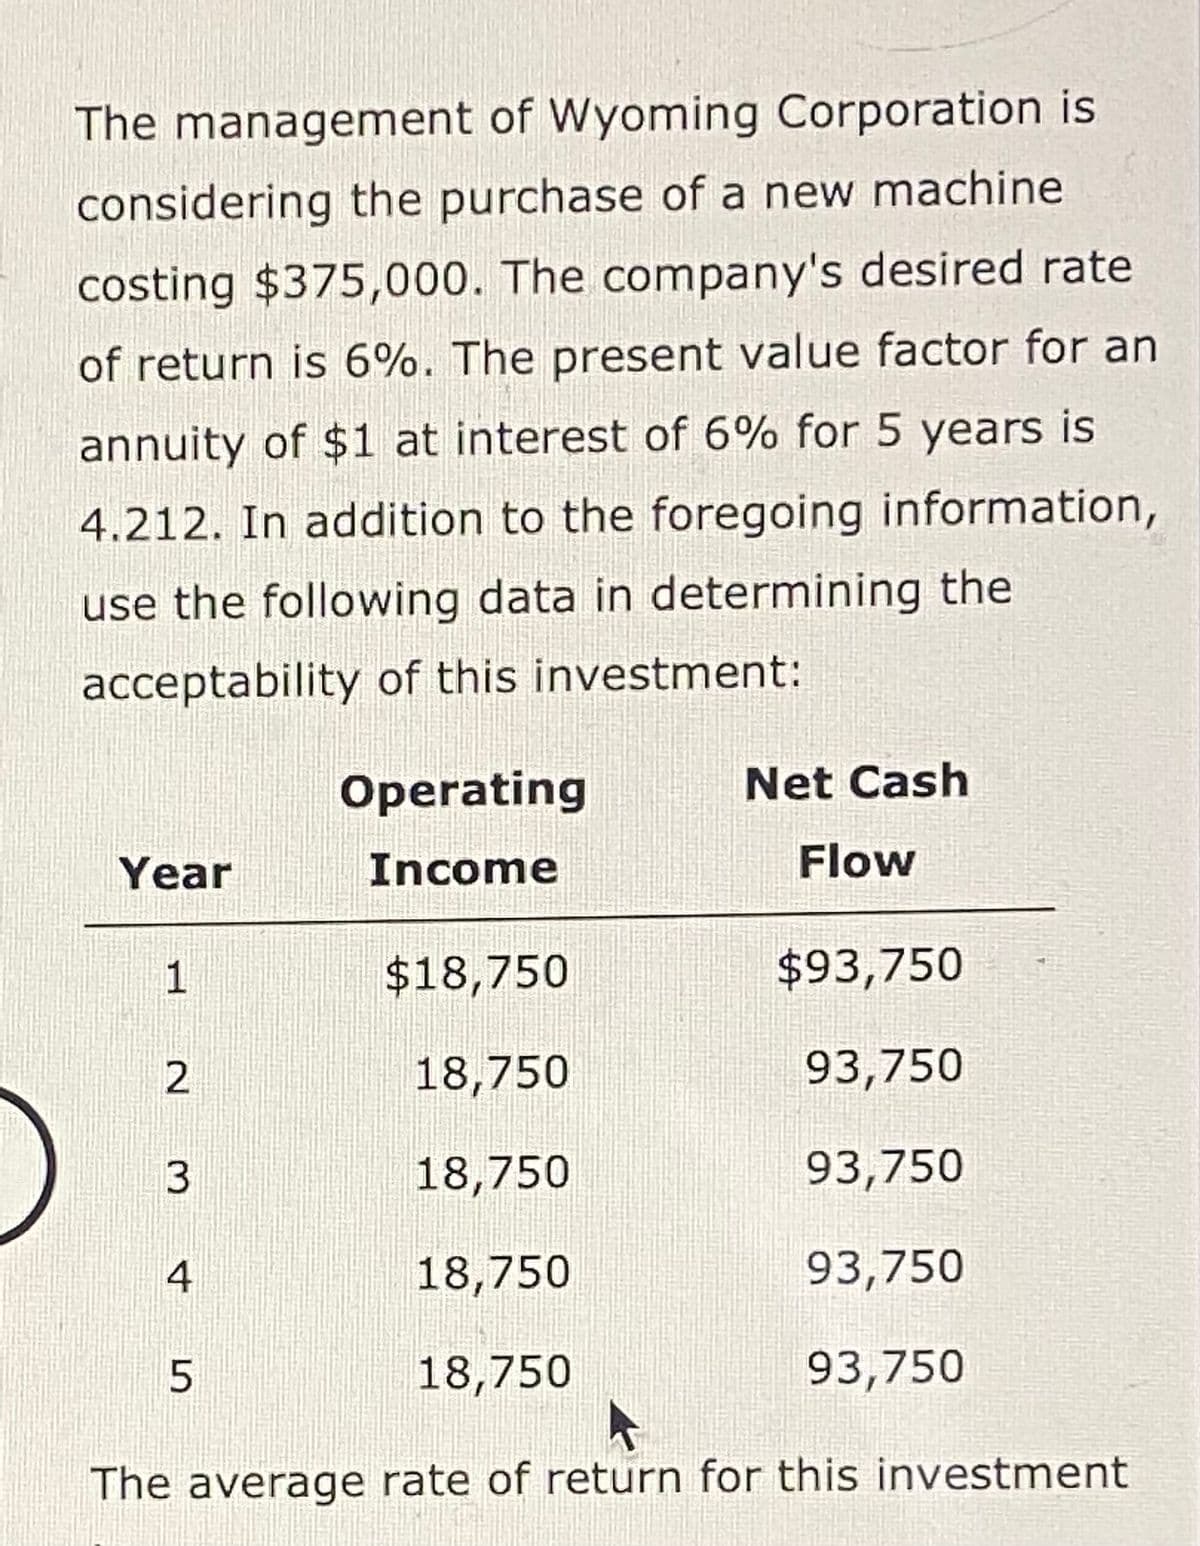 The management of Wyoming Corporation is
considering the purchase of a new machine
costing $375,000. The company's desired rate
of return is 6%. The present value factor for an
annuity of $1 at interest of 6% for 5 years is
4.212. In addition to the foregoing information,
use the following data in determining the
acceptability of this investment:
Year
1
2
$18,750
18,750
18,750
18,750
18,750
The average rate of return for this investment
3
4
Operating
Income
5
Net Cash
Flow
$93,750
93,750
93,750
93,750
93,750